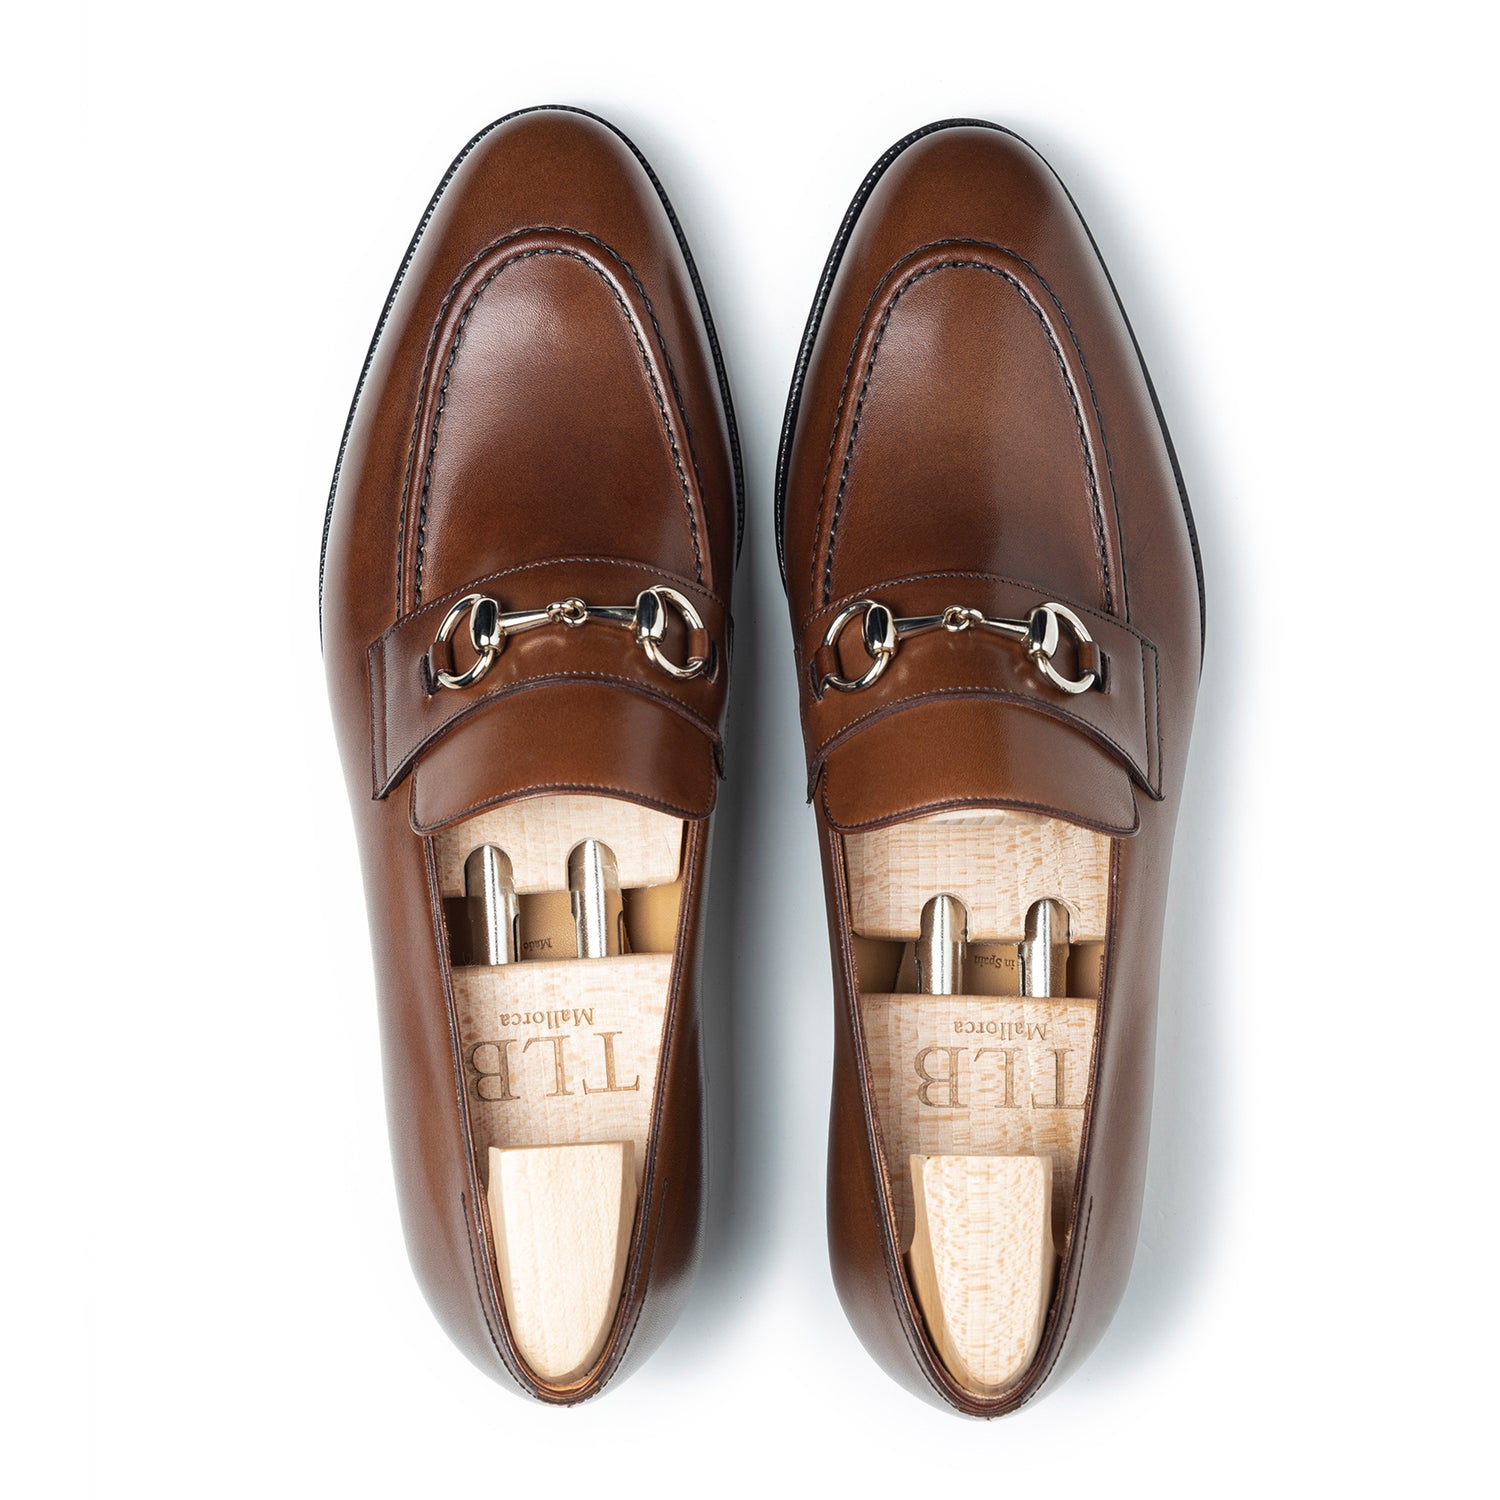 TLB Mallorca  Leather Men's Loafers made in Spain